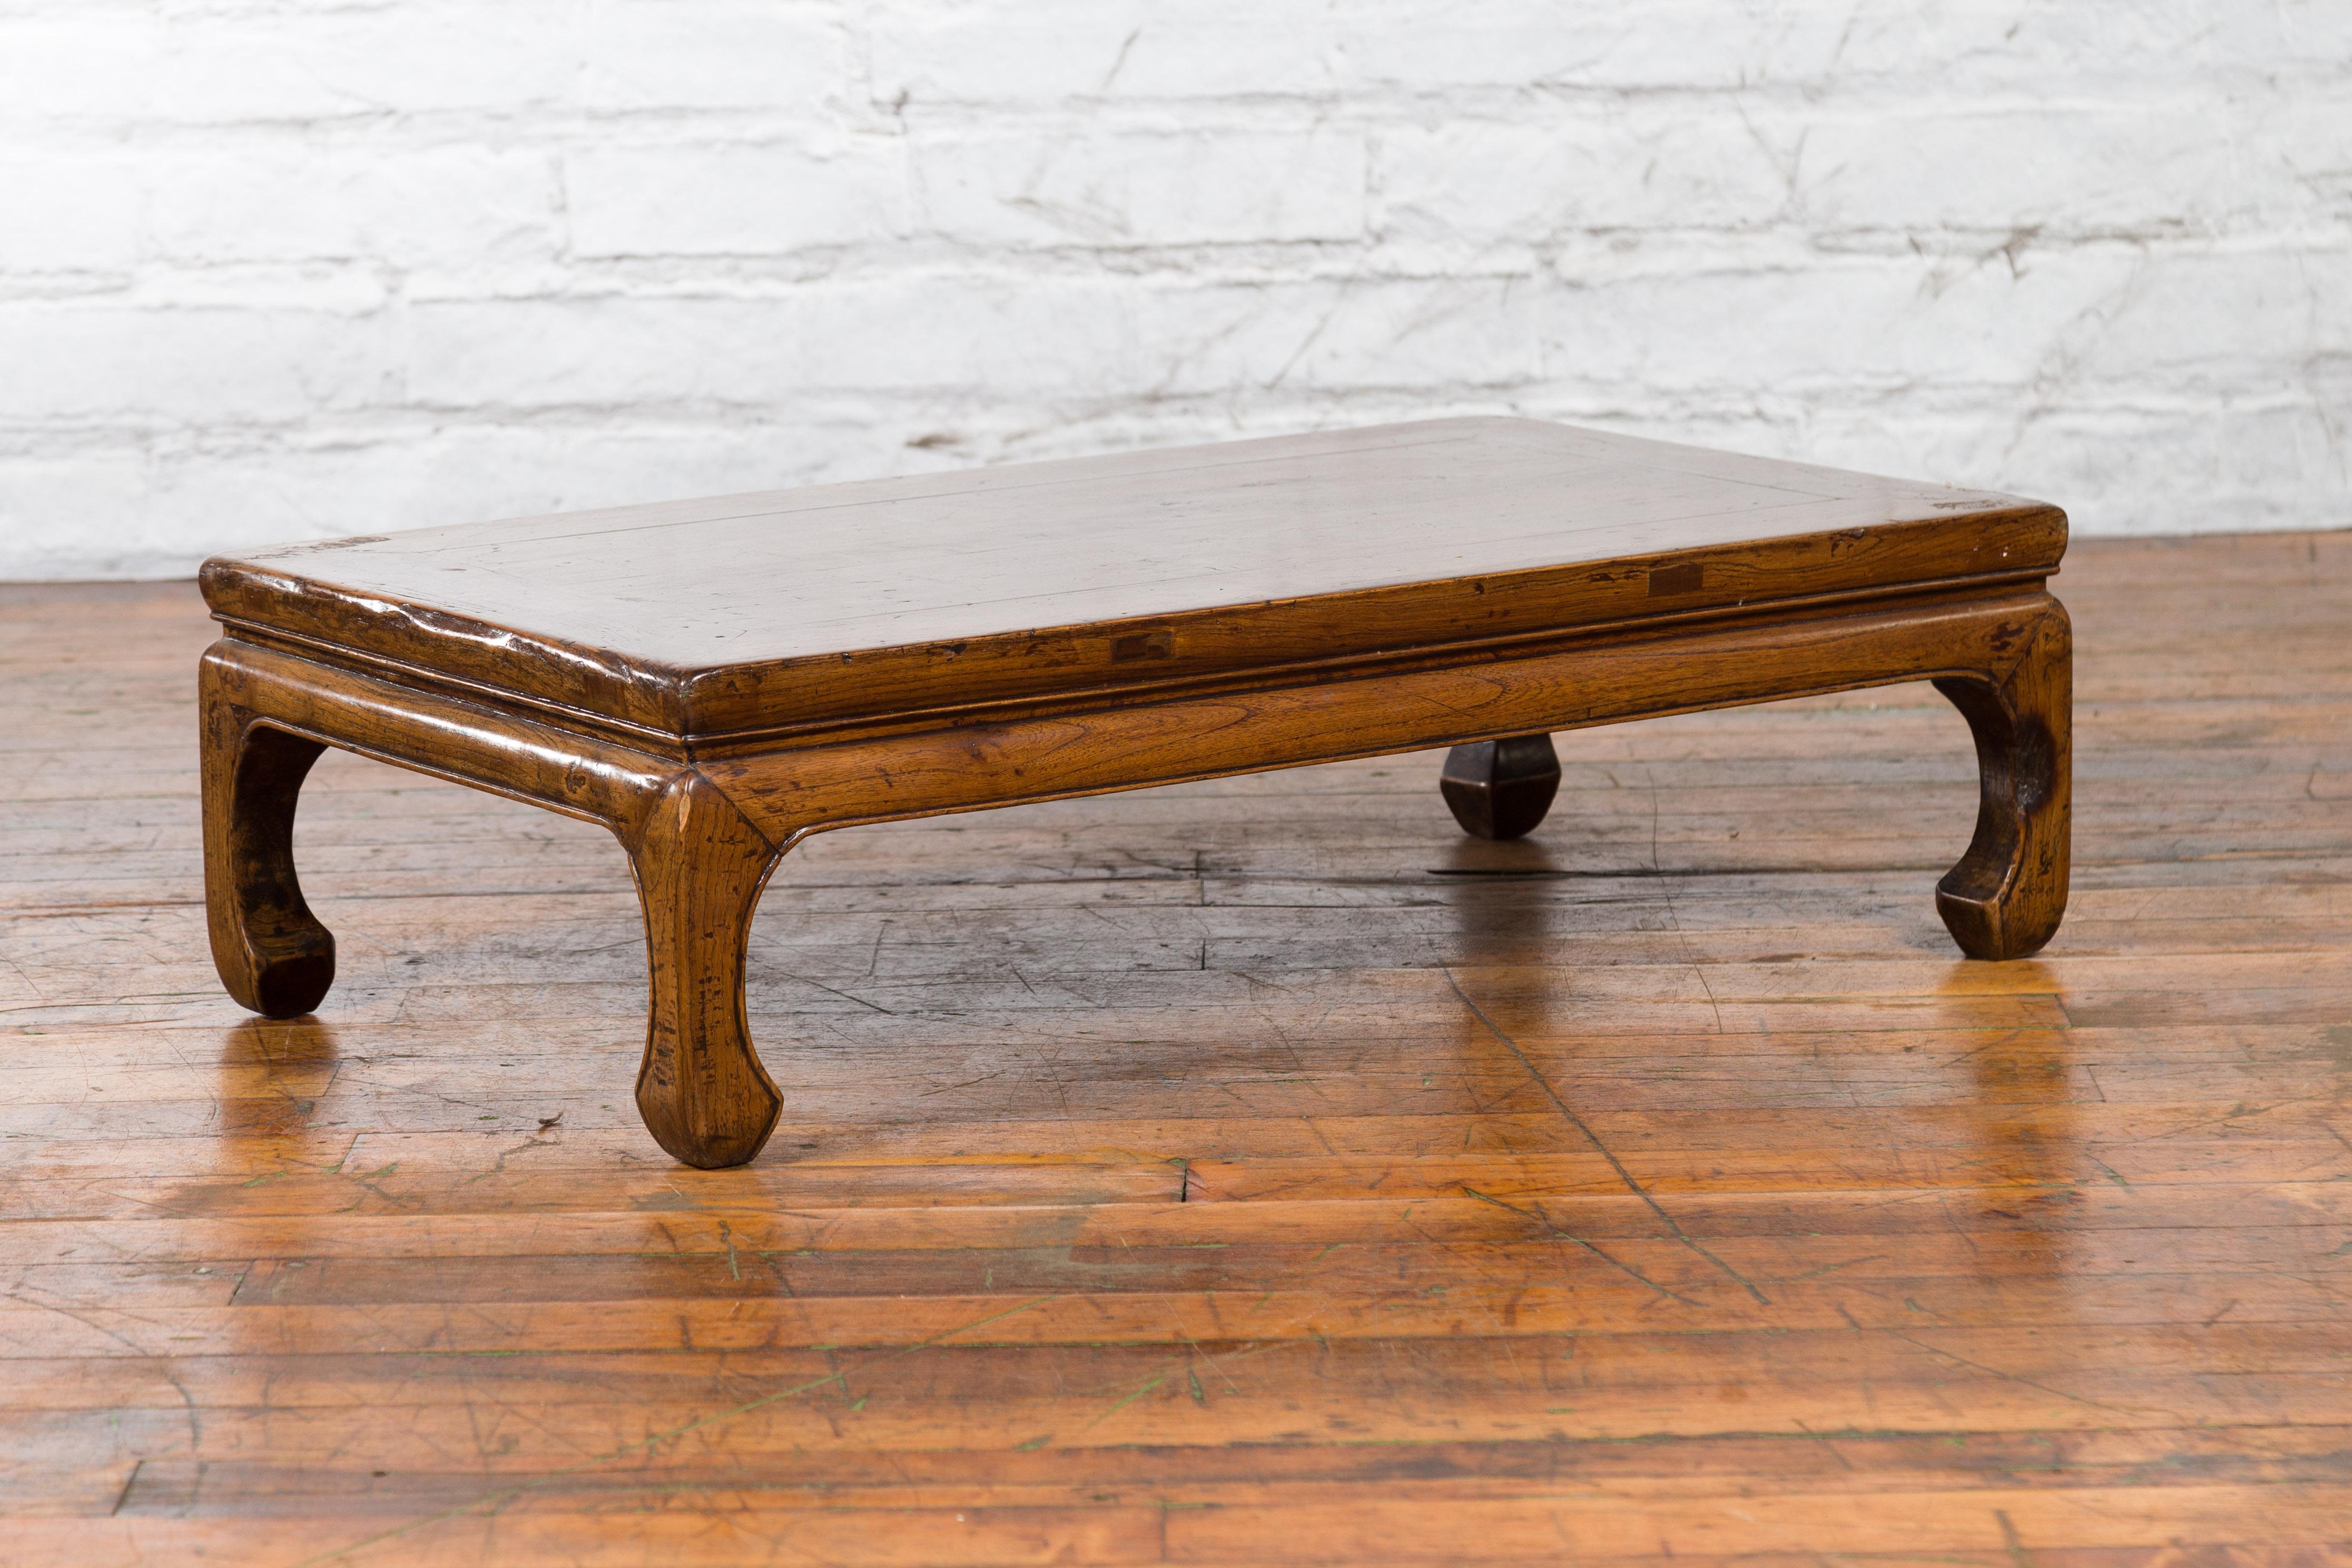 Chinese 19th Century Qing Dynasty Elm Kang Coffee Table with Horse Hoof Legs 2